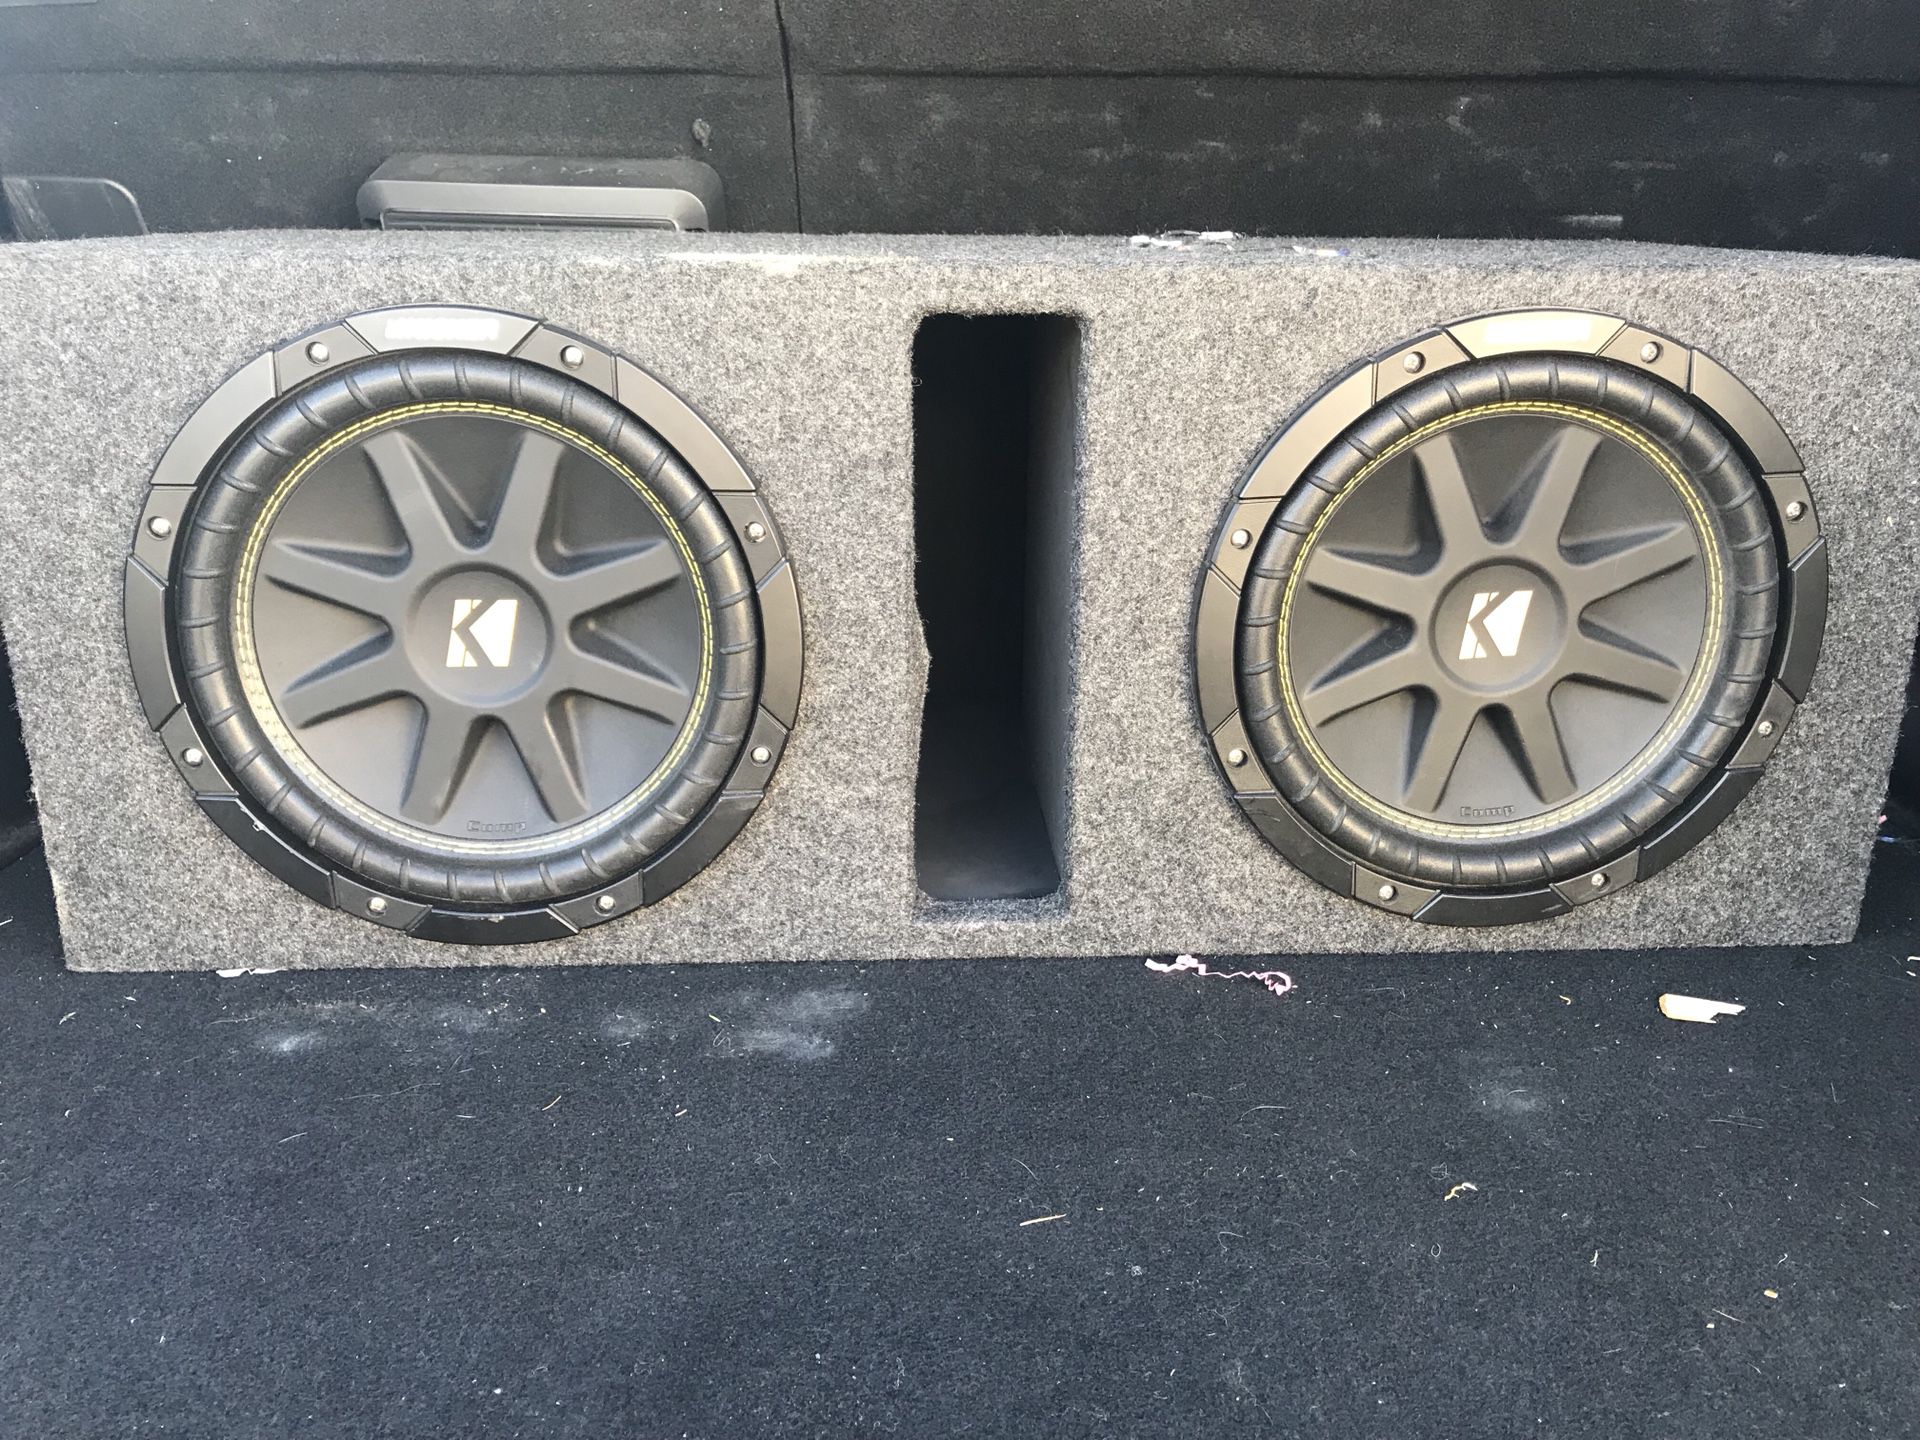 Awesome car audio system